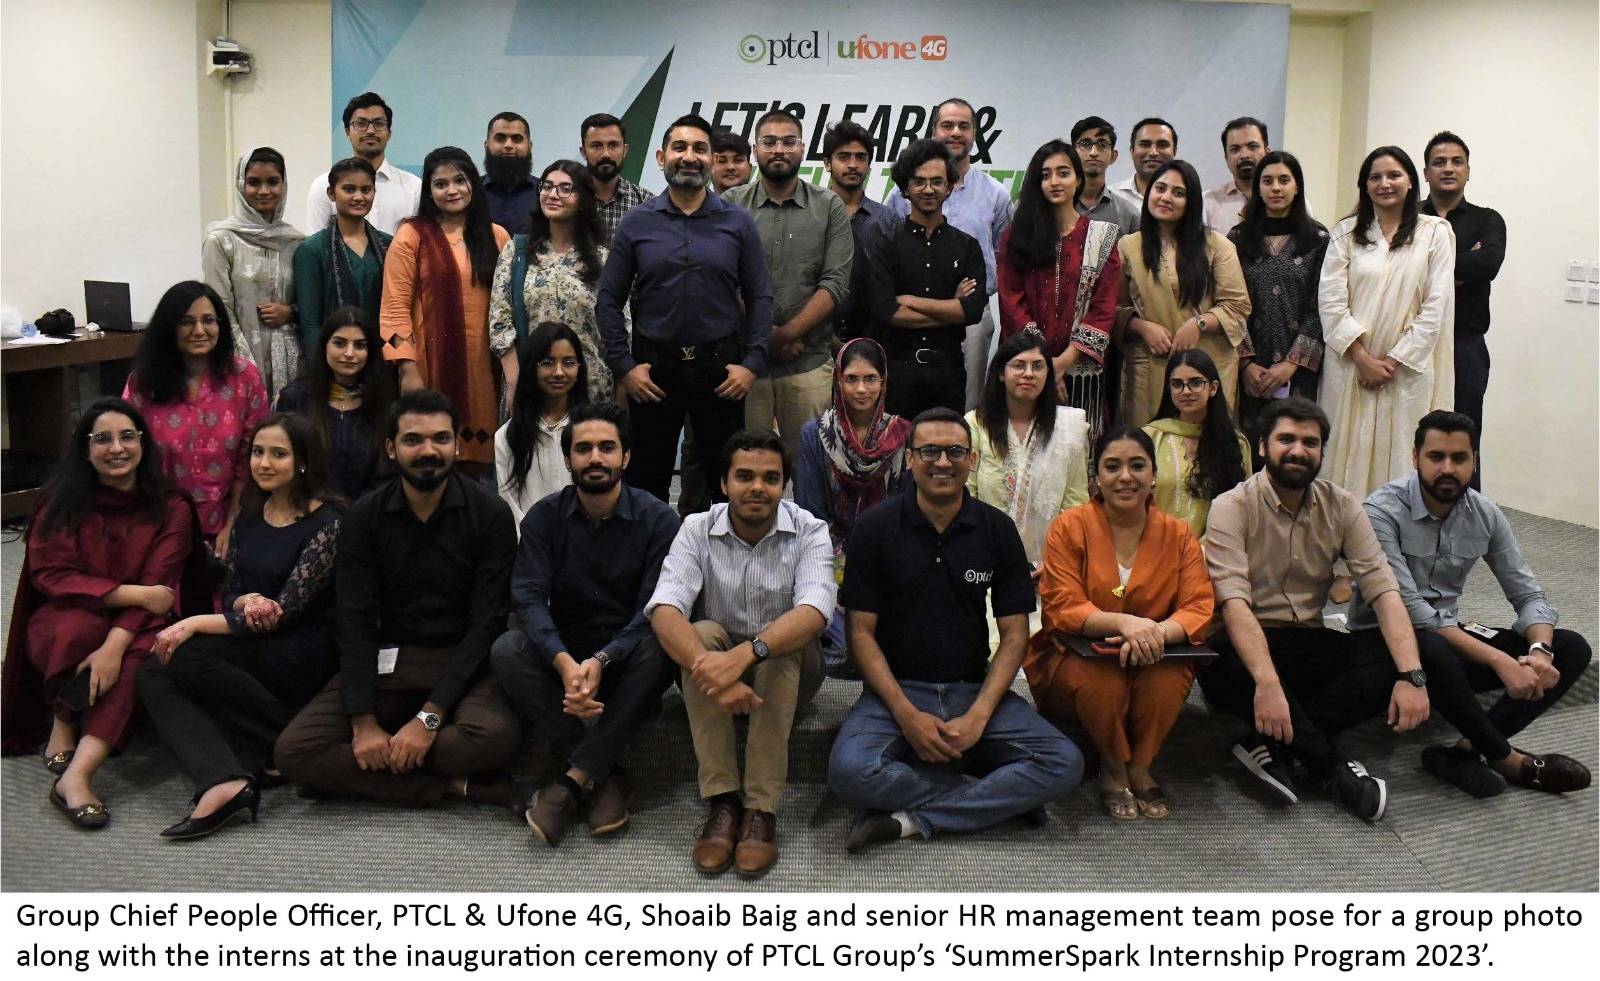 PTCL Group’s SummerSpark Internship Program 2023 set to ignite careers of young graduates